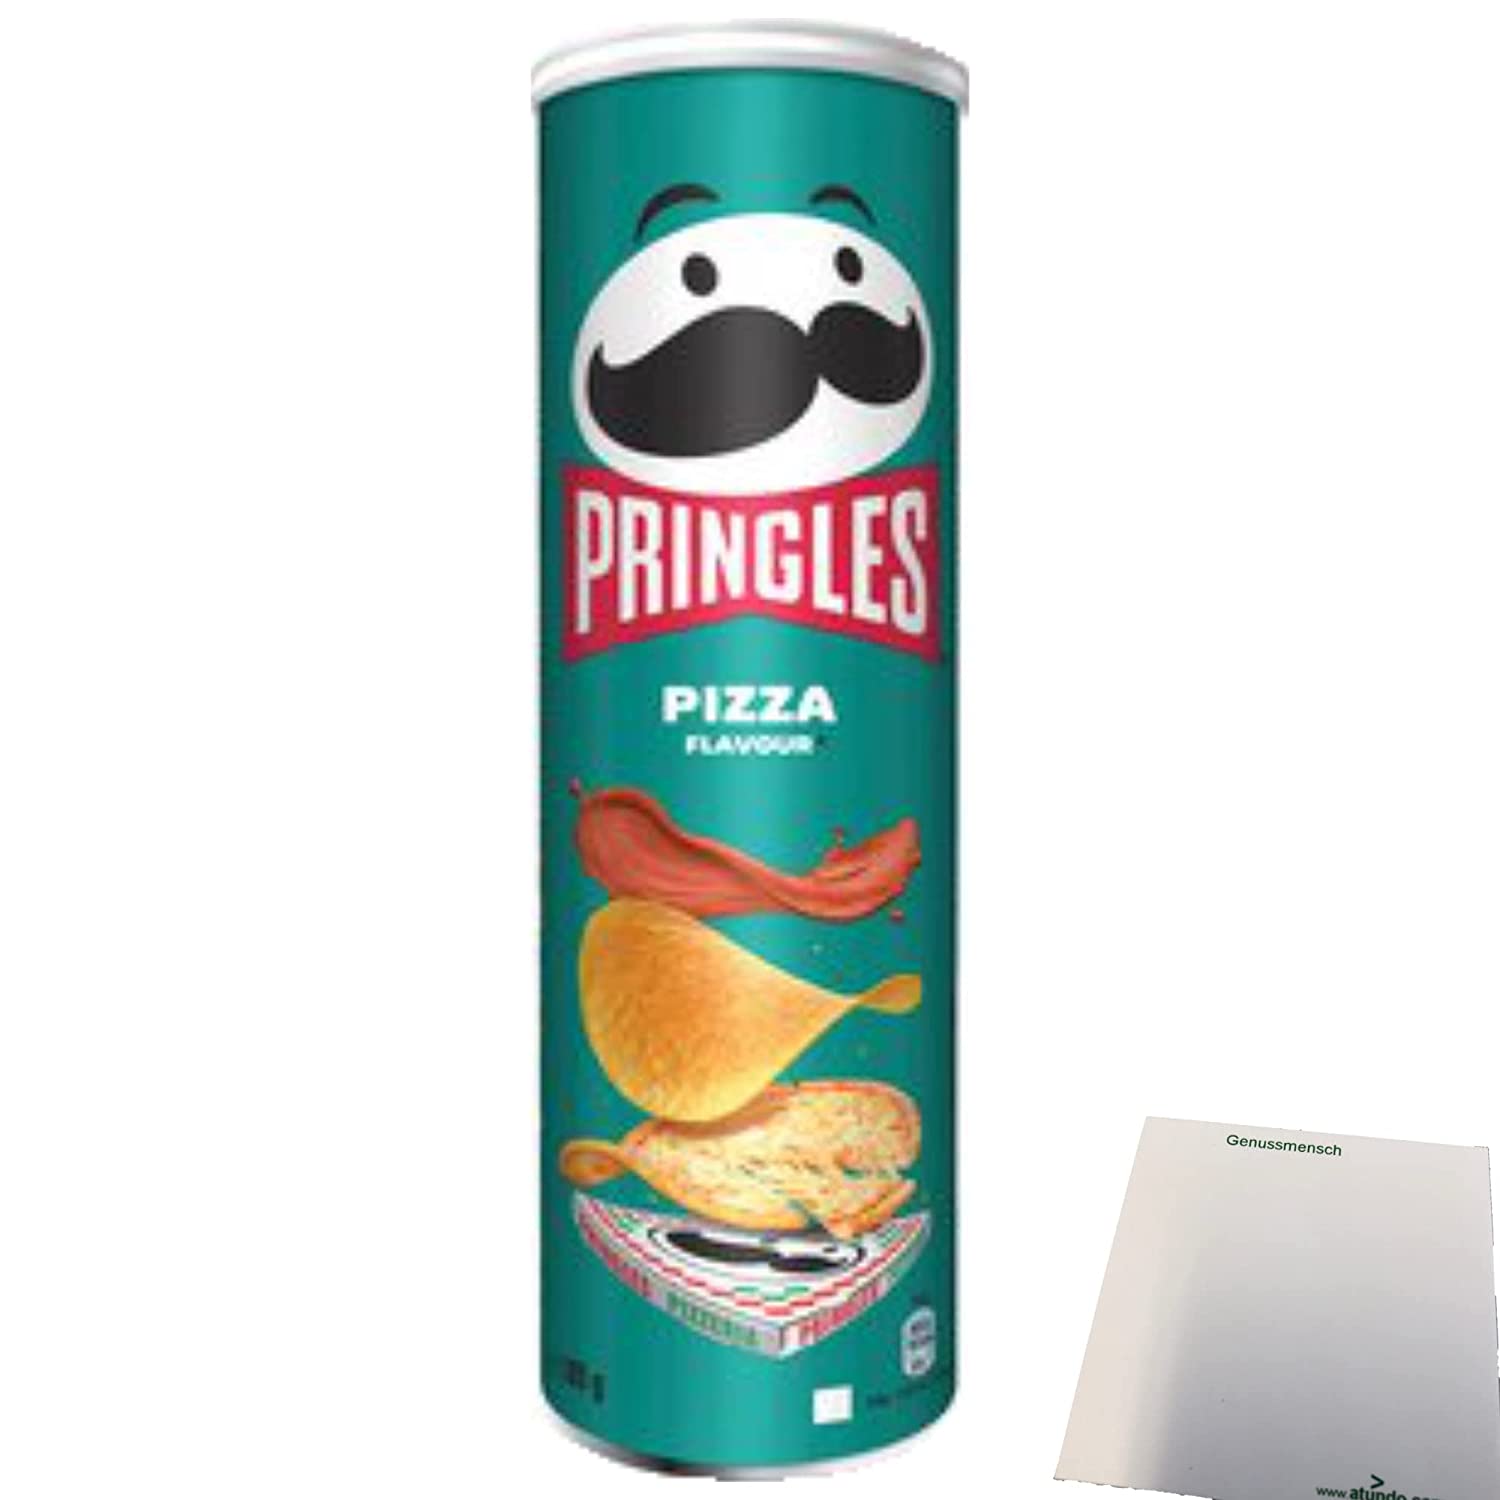 Pringles Pizza Flavour (185g Packung) + usy Block